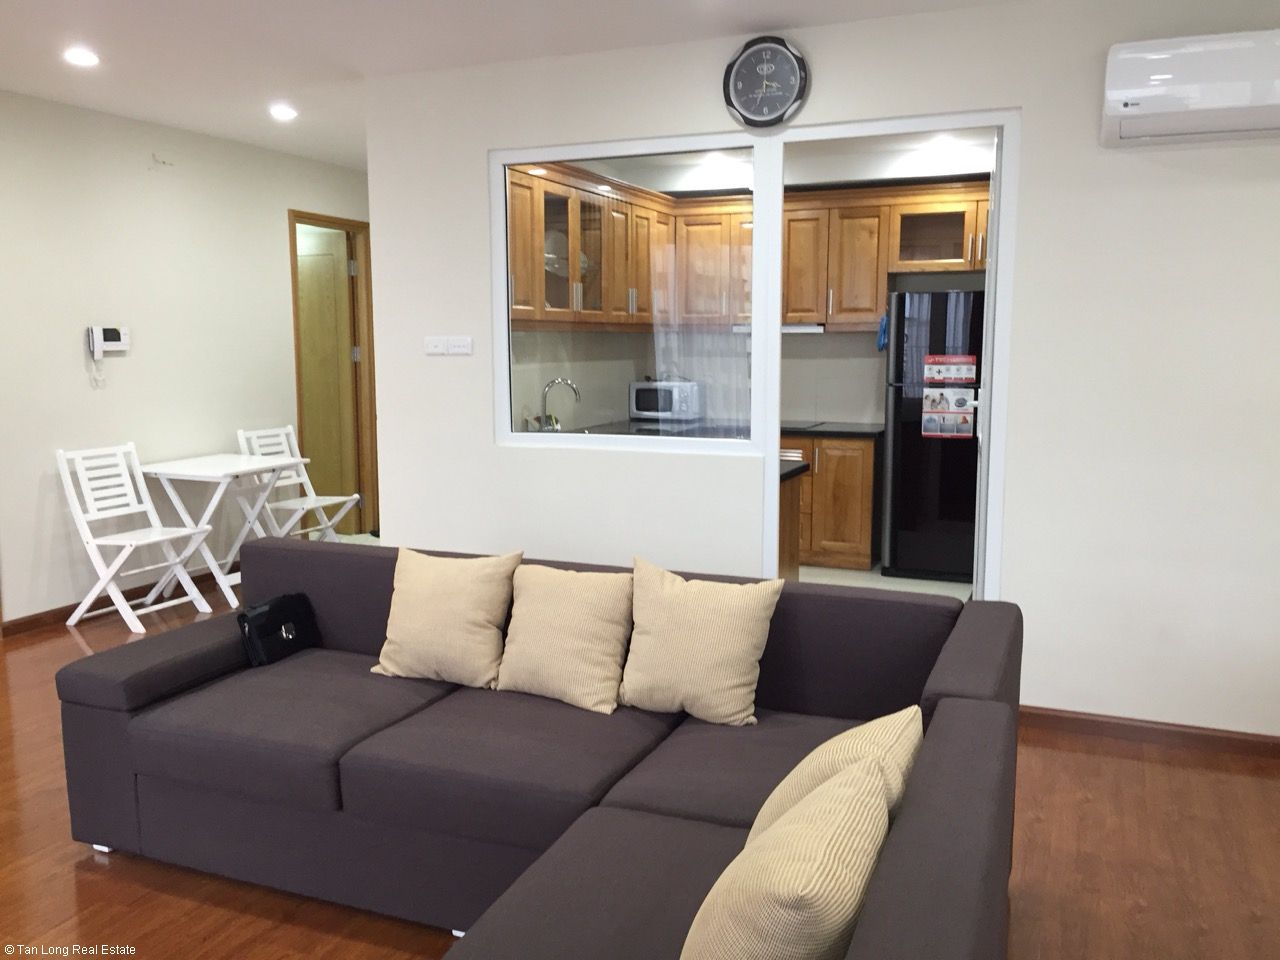 Brand new 3 bedroom furnished apartment in N04 building for rent on Hoang Dao Thuy street, Trung Hoa Nhan Chinh, Cau Giay 3